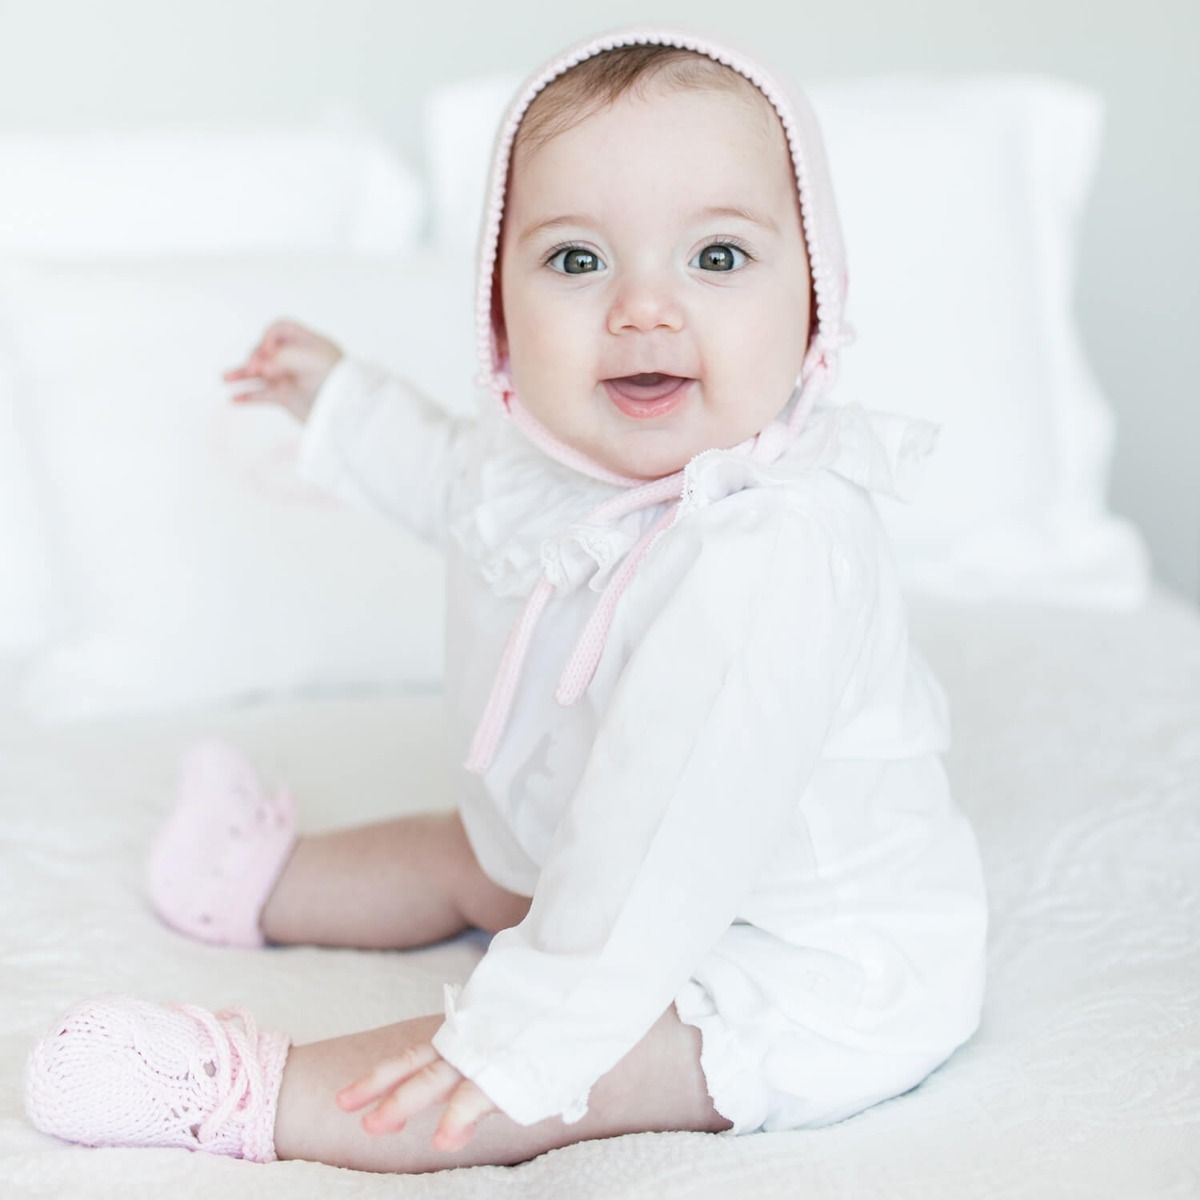 The hands of our artisans bring to life the softest organic cotton yarn and with the most beautiful valenciennes lace create a genuine masterpiece that becomes part of the family’s heirlooms. Our Purity Baby Blouse will keep your baby warm, cozy and elega